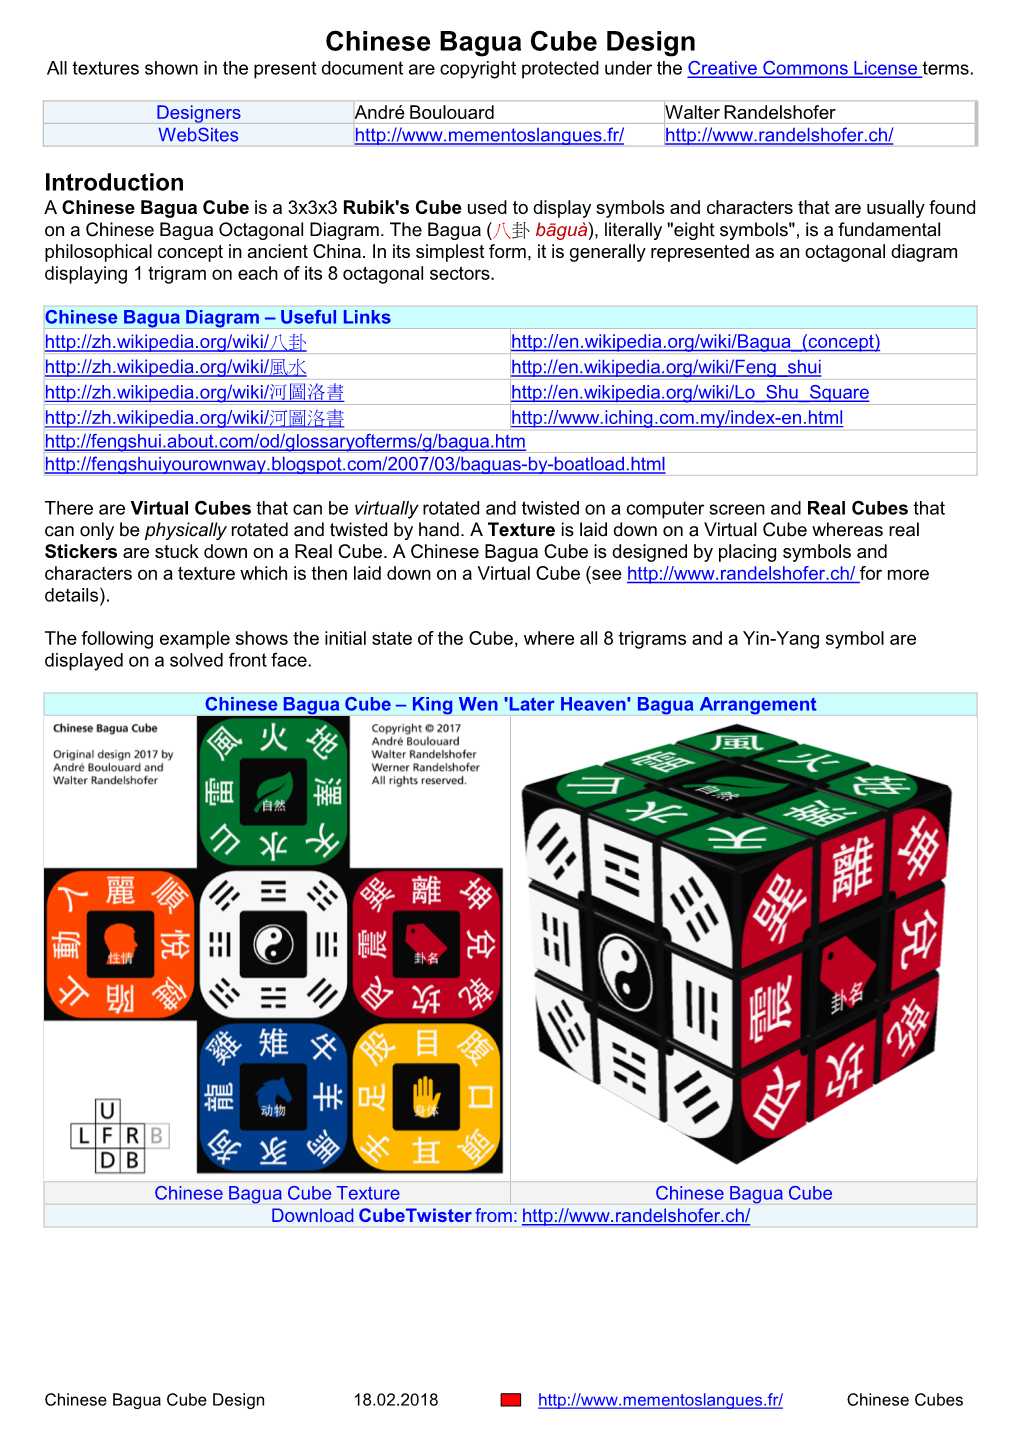 Chinese Bagua Cube Design All Textures Shown in the Present Document Are Copyright Protected Under the Creative Commons License Terms